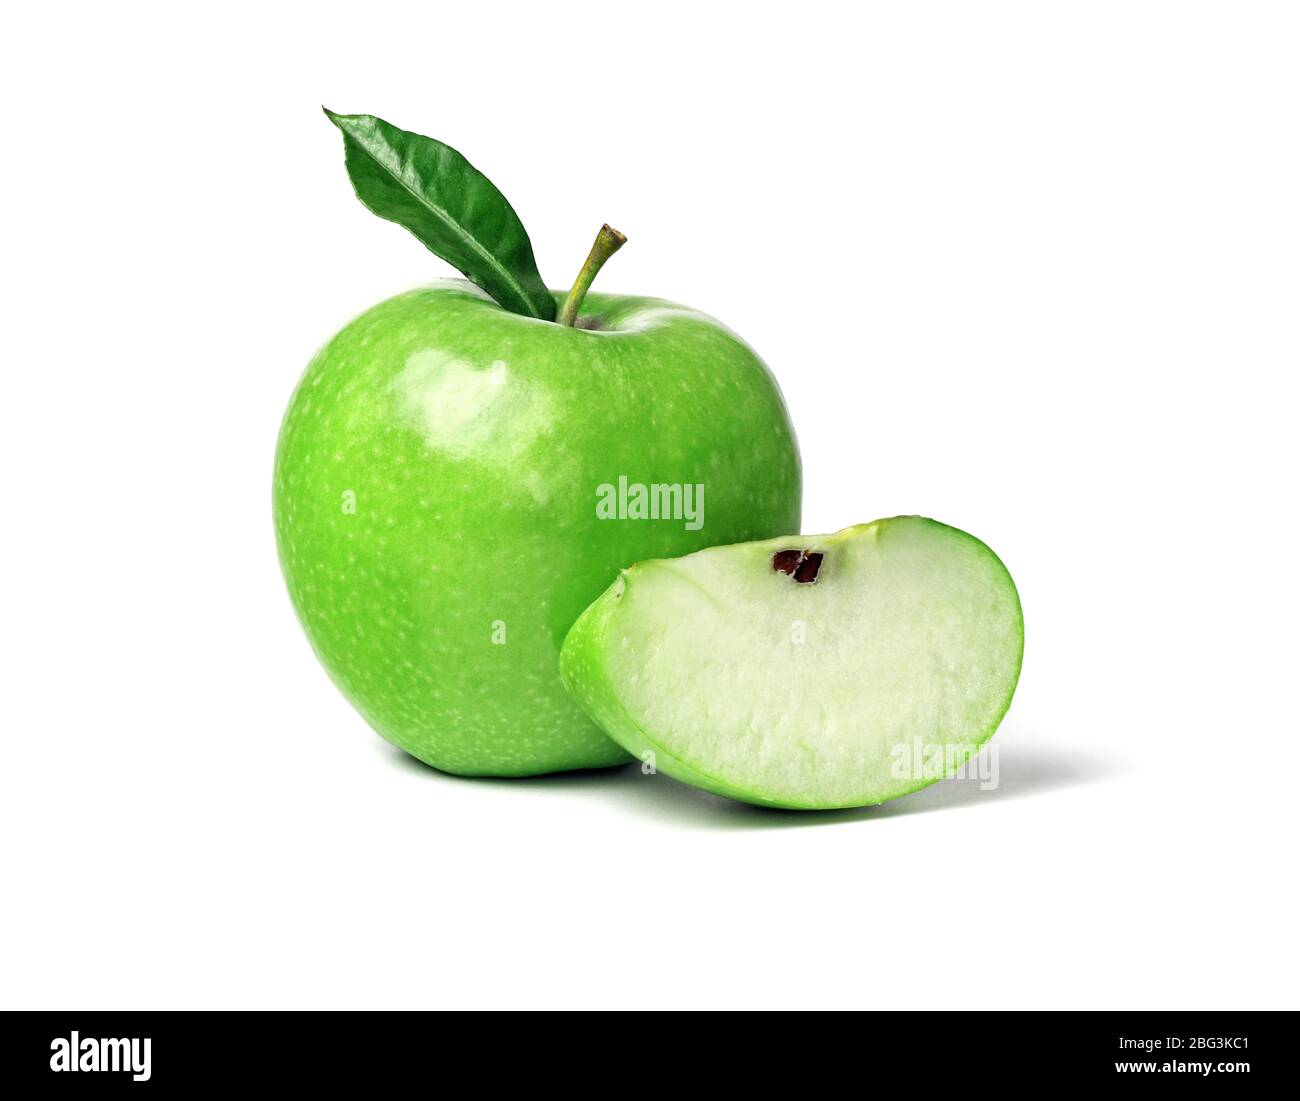 Green ripe apple with green leaf and slice isolated on a white background Stock Photo